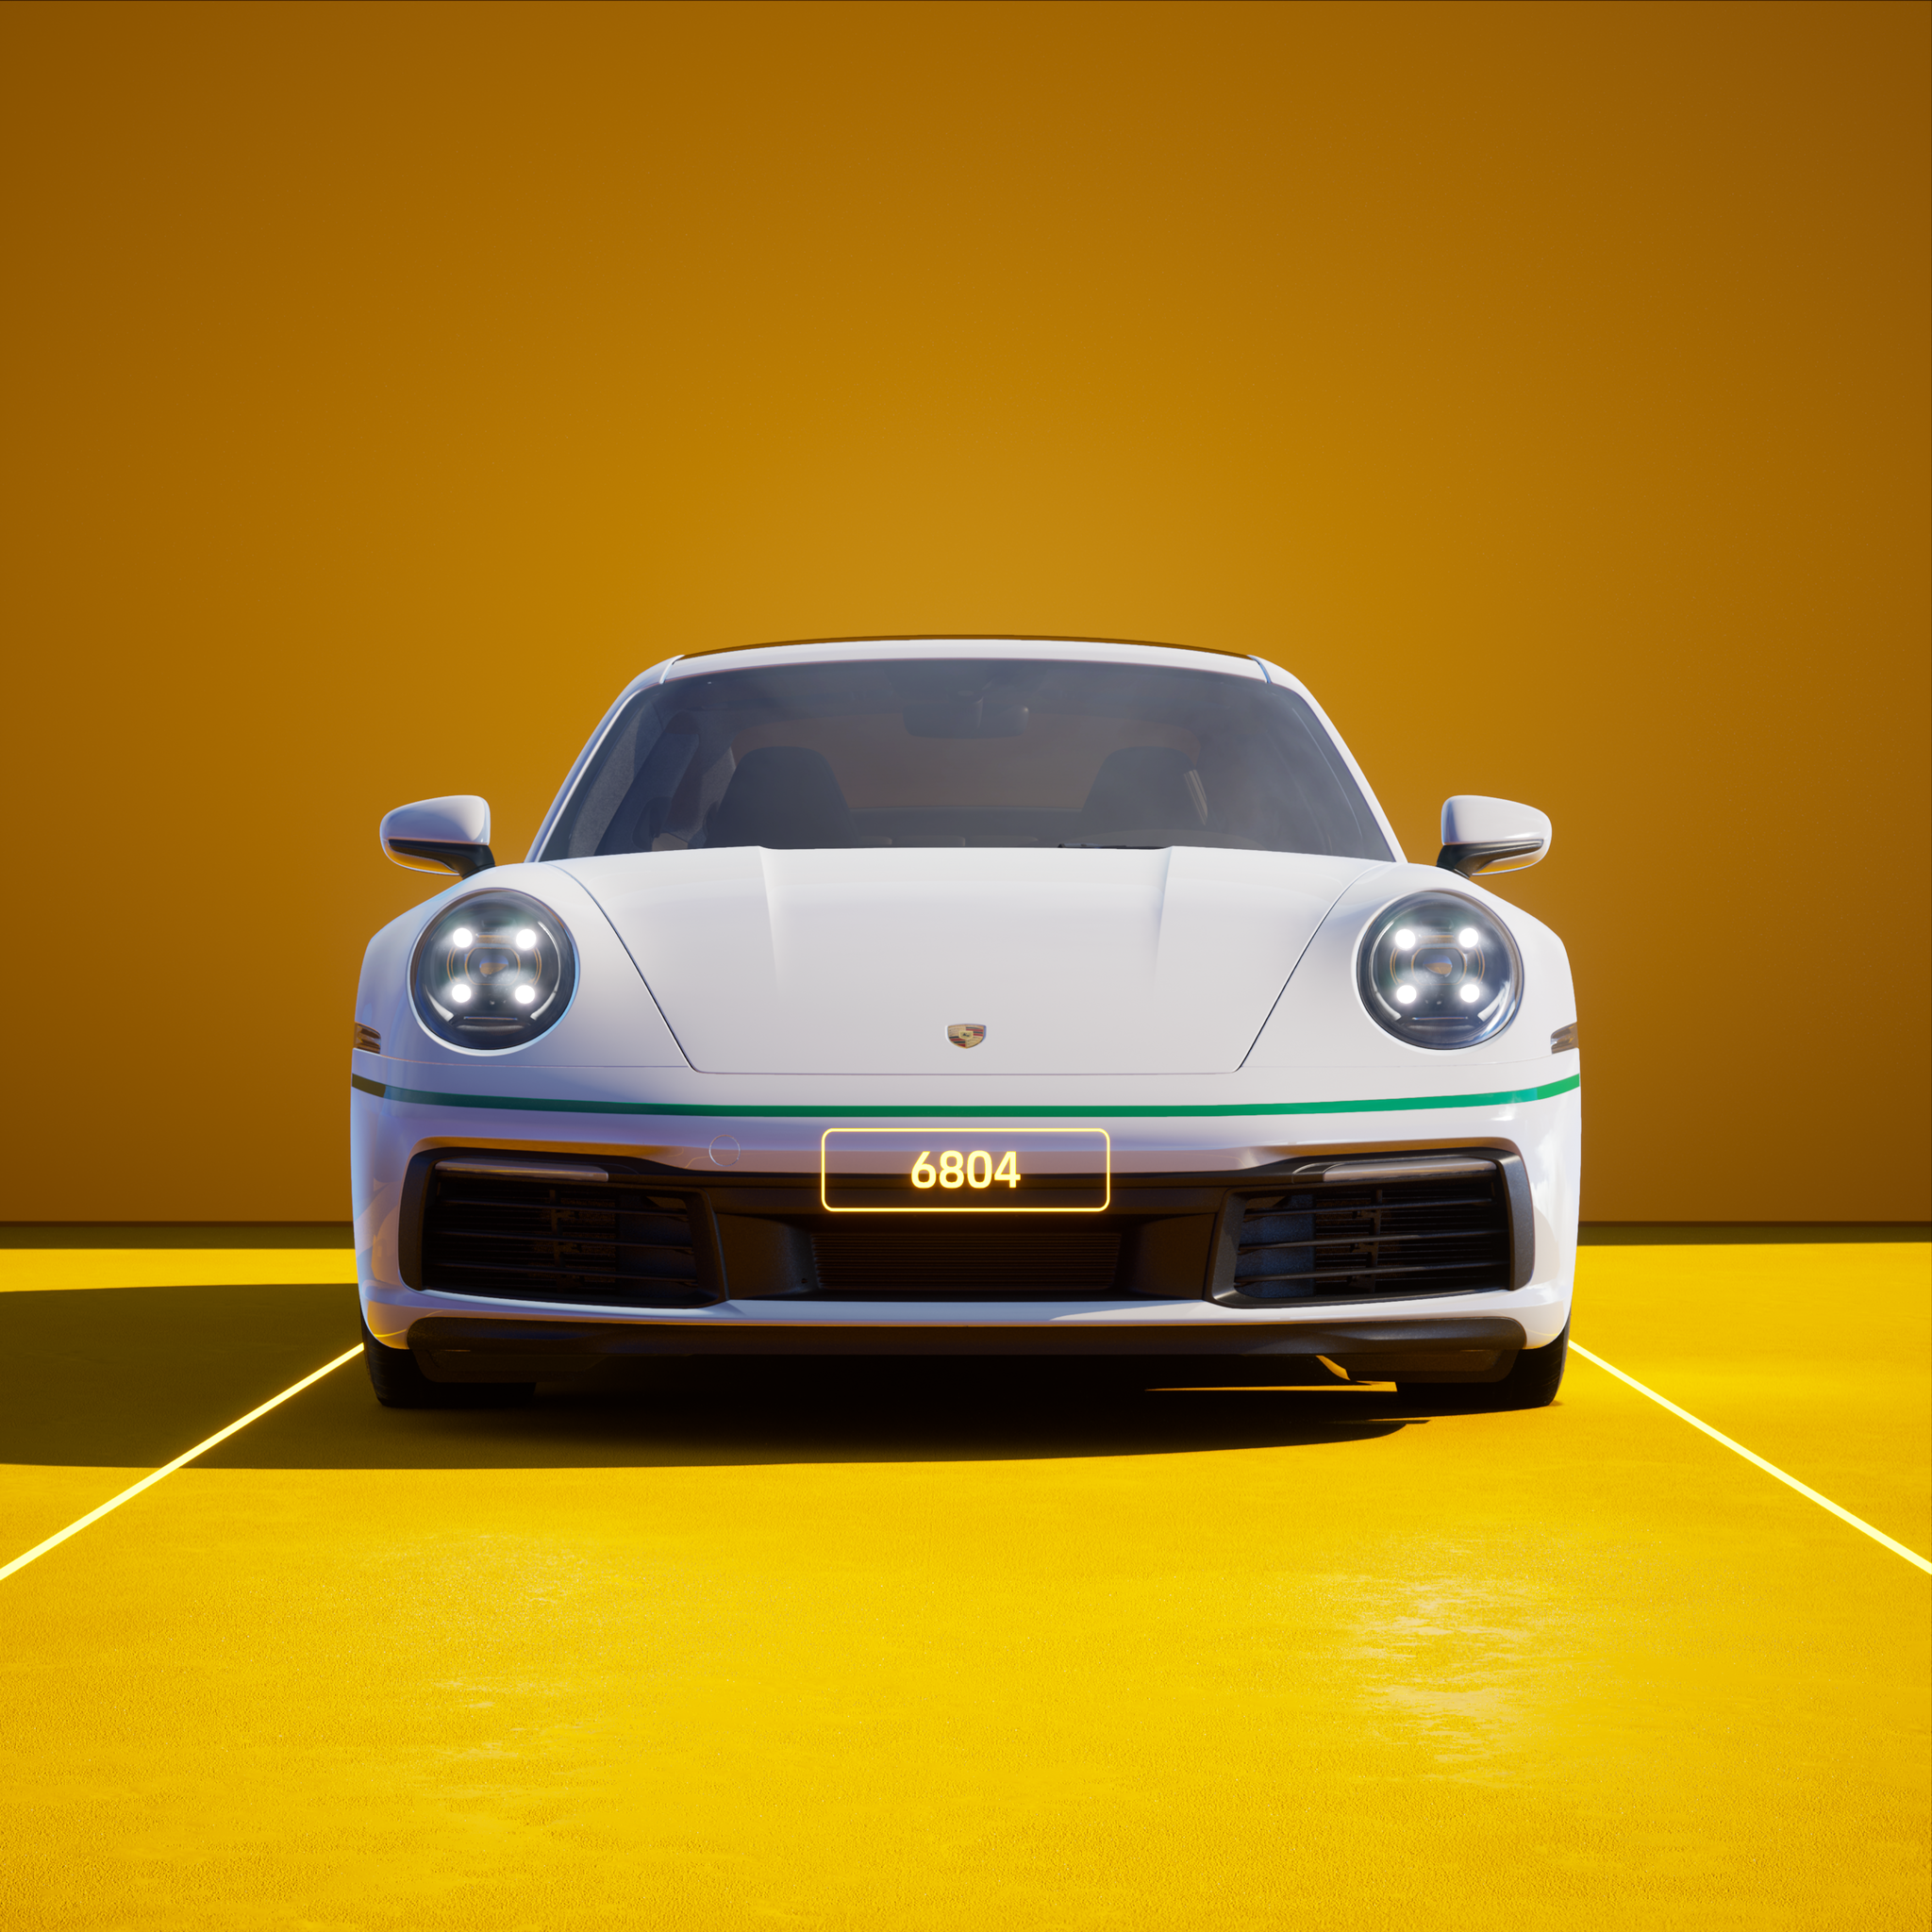 The PORSCHΞ 911 6804 image in phase